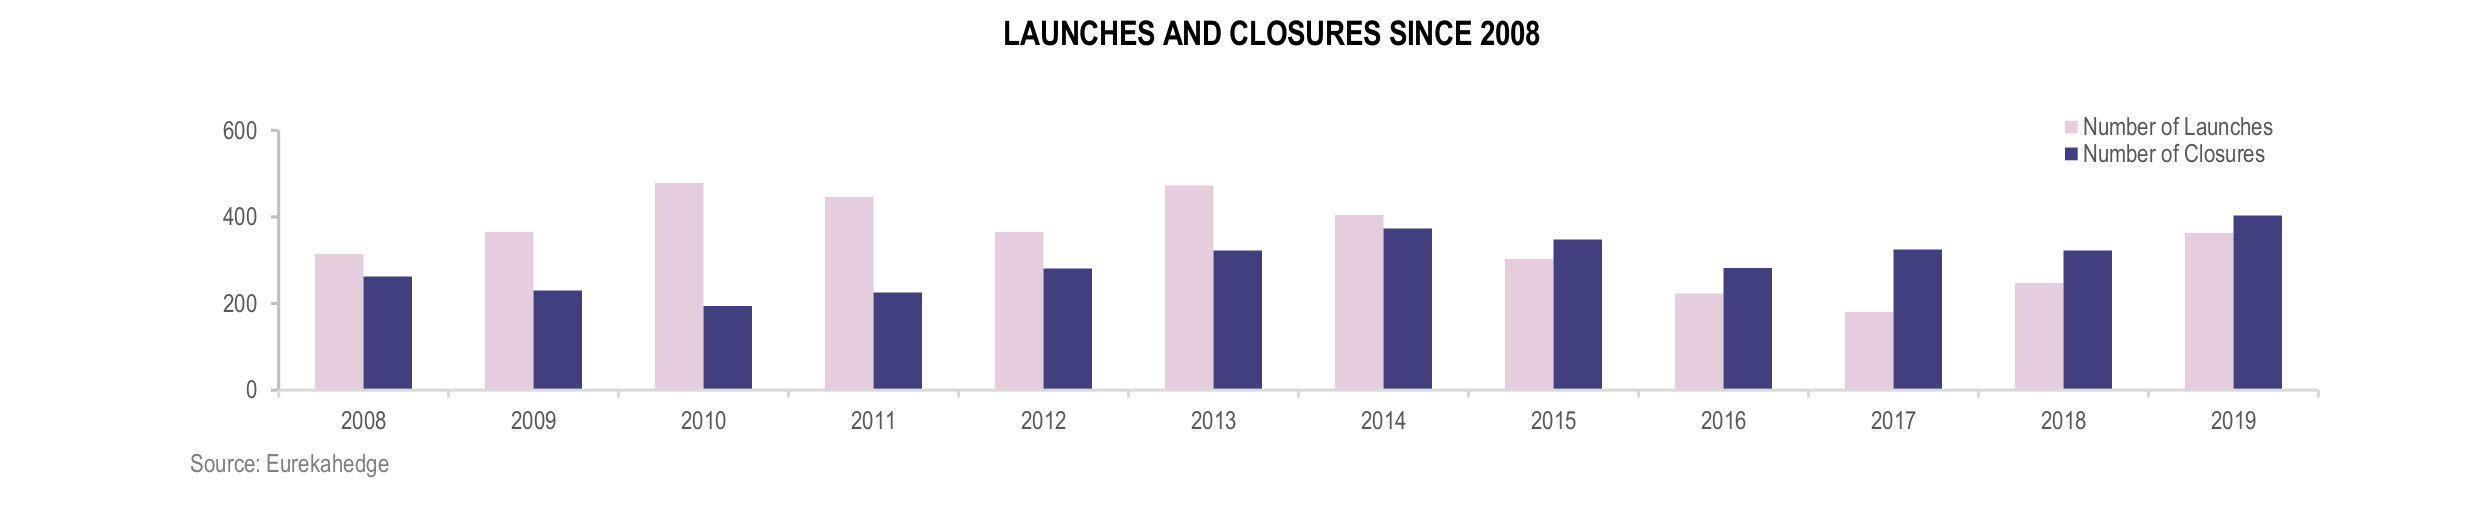 European Hedge Funds Infographic April 2020 - Launches and Closures